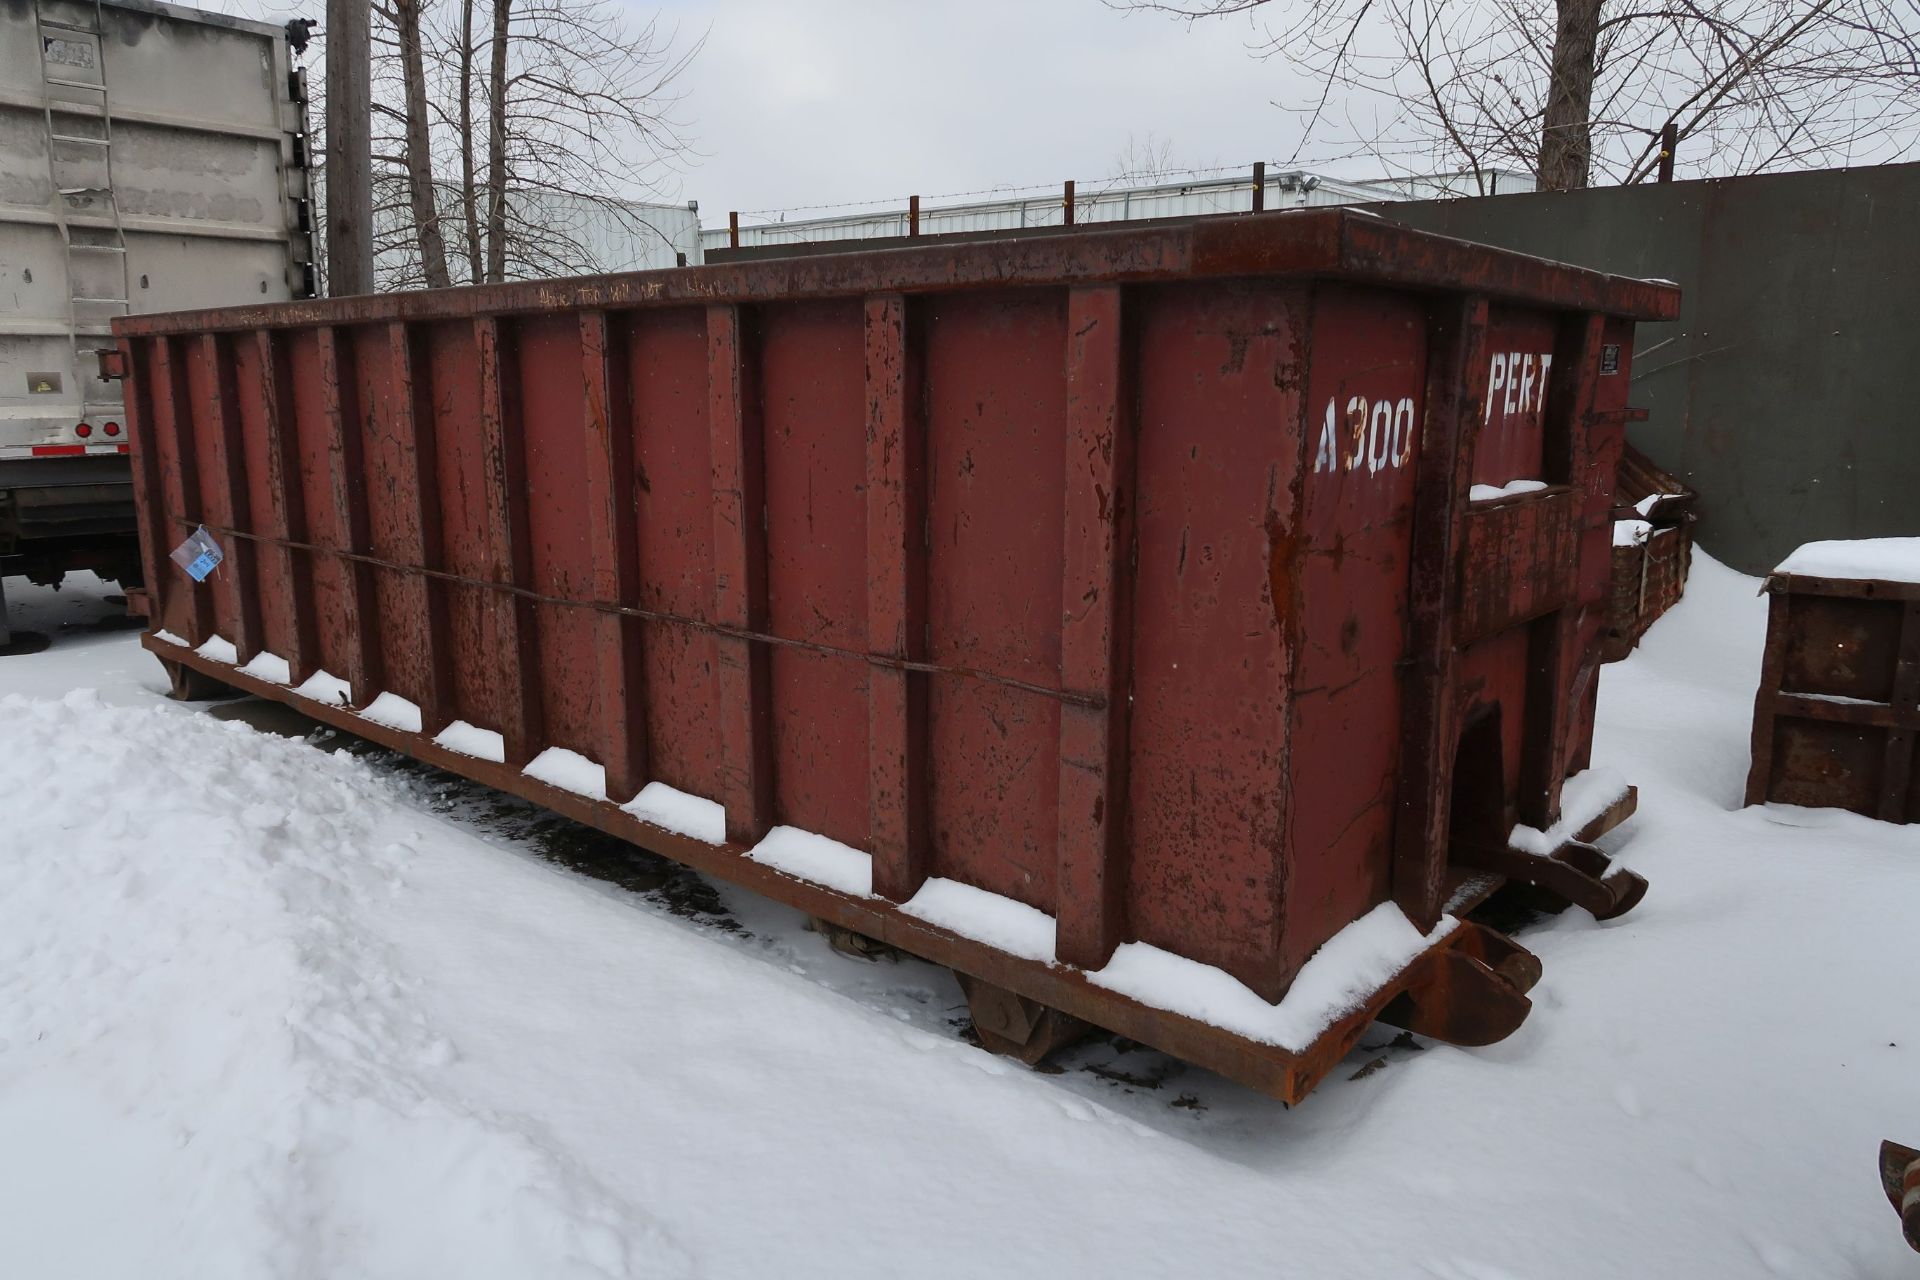 40 YARD ROLL-OFF CONTAINER, 22' X 8' X 66" HIGH - Image 2 of 3